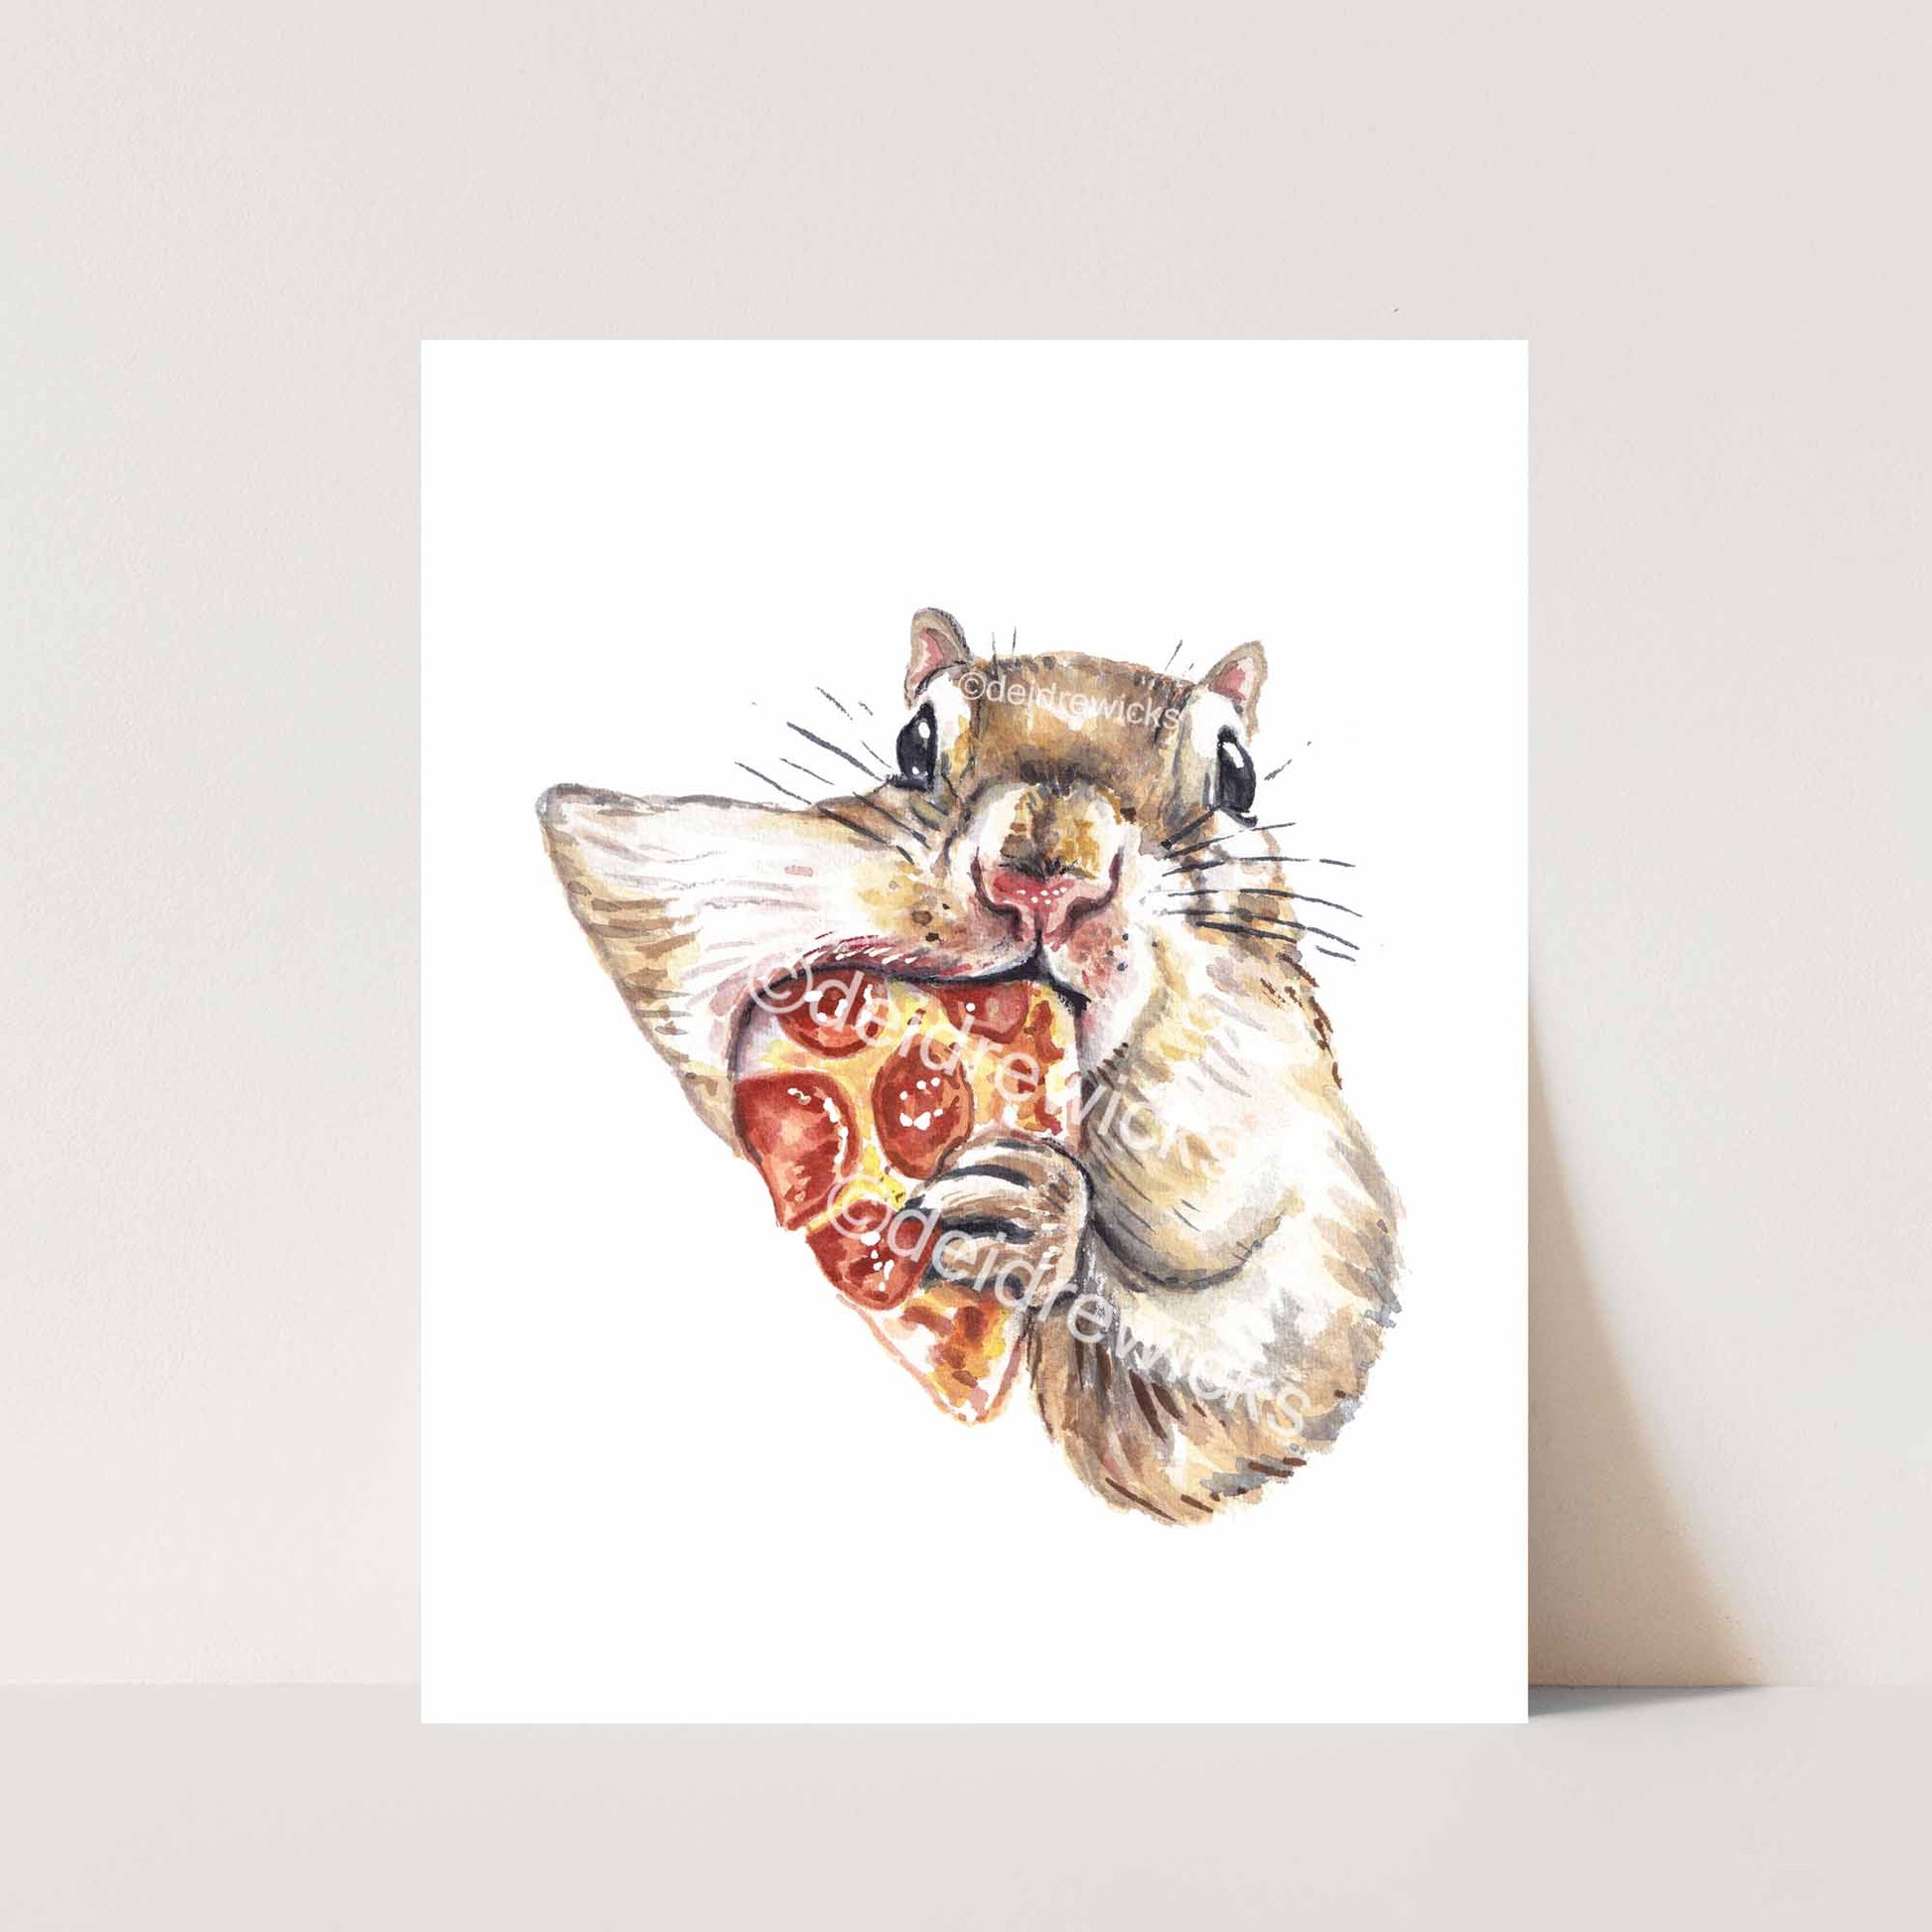 Watercolour painting print of a squirrel eating a huge piece of pizza